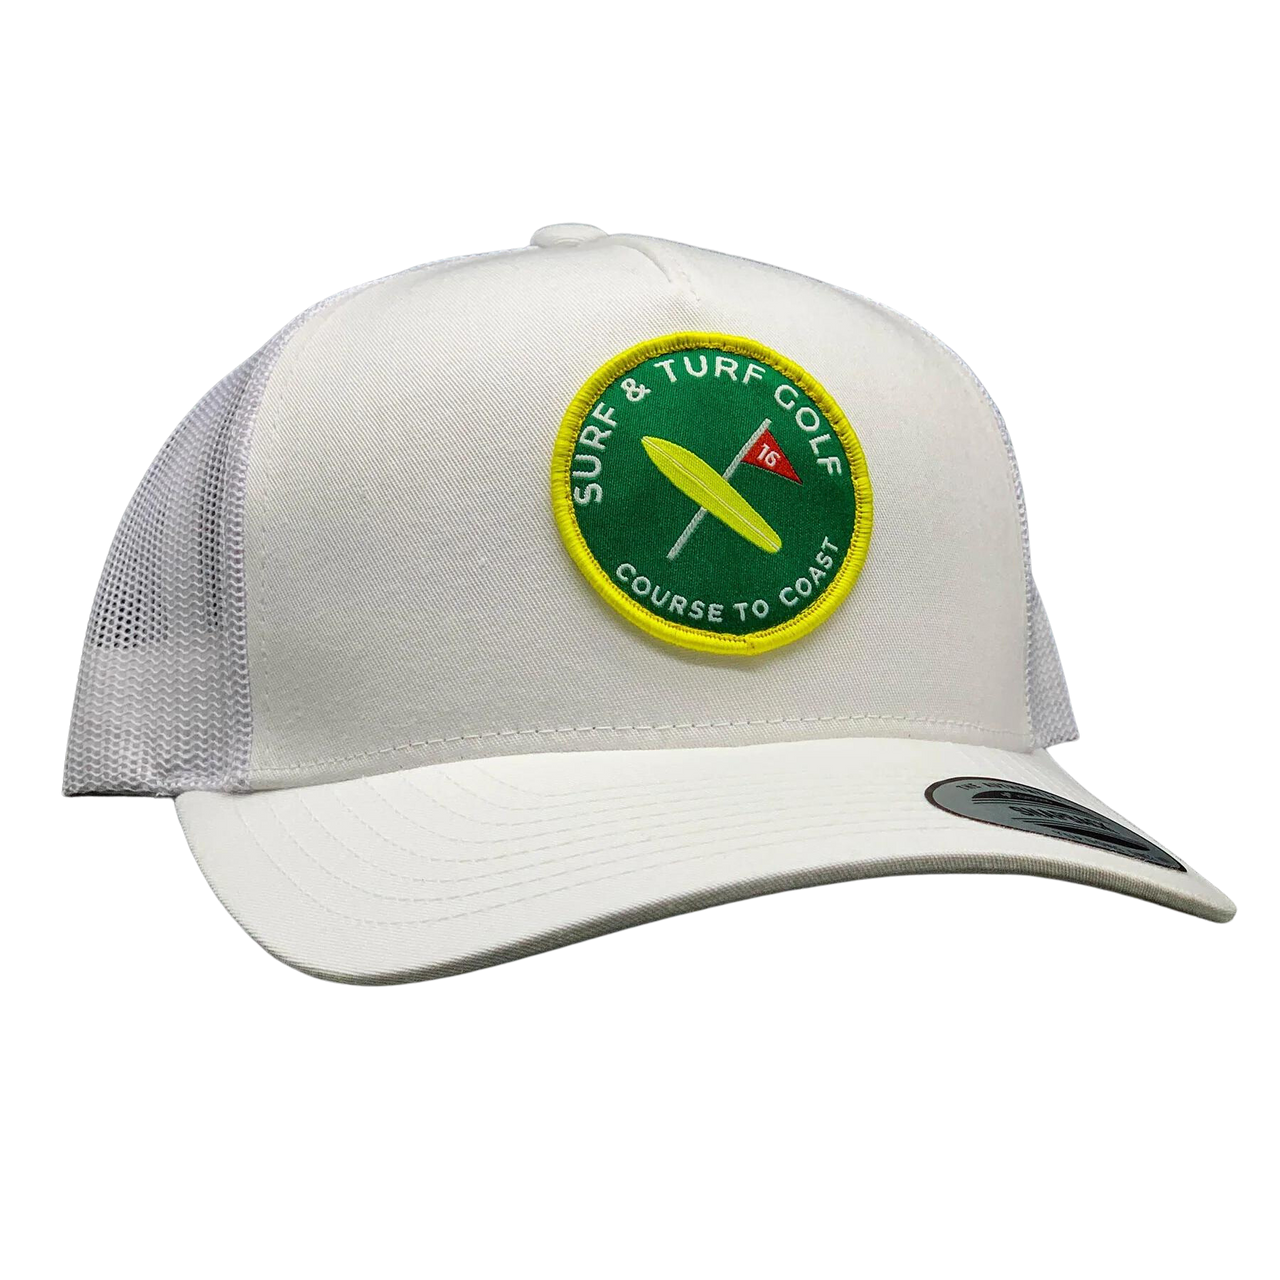 Surf & Turf Course to Coast 10 Hat